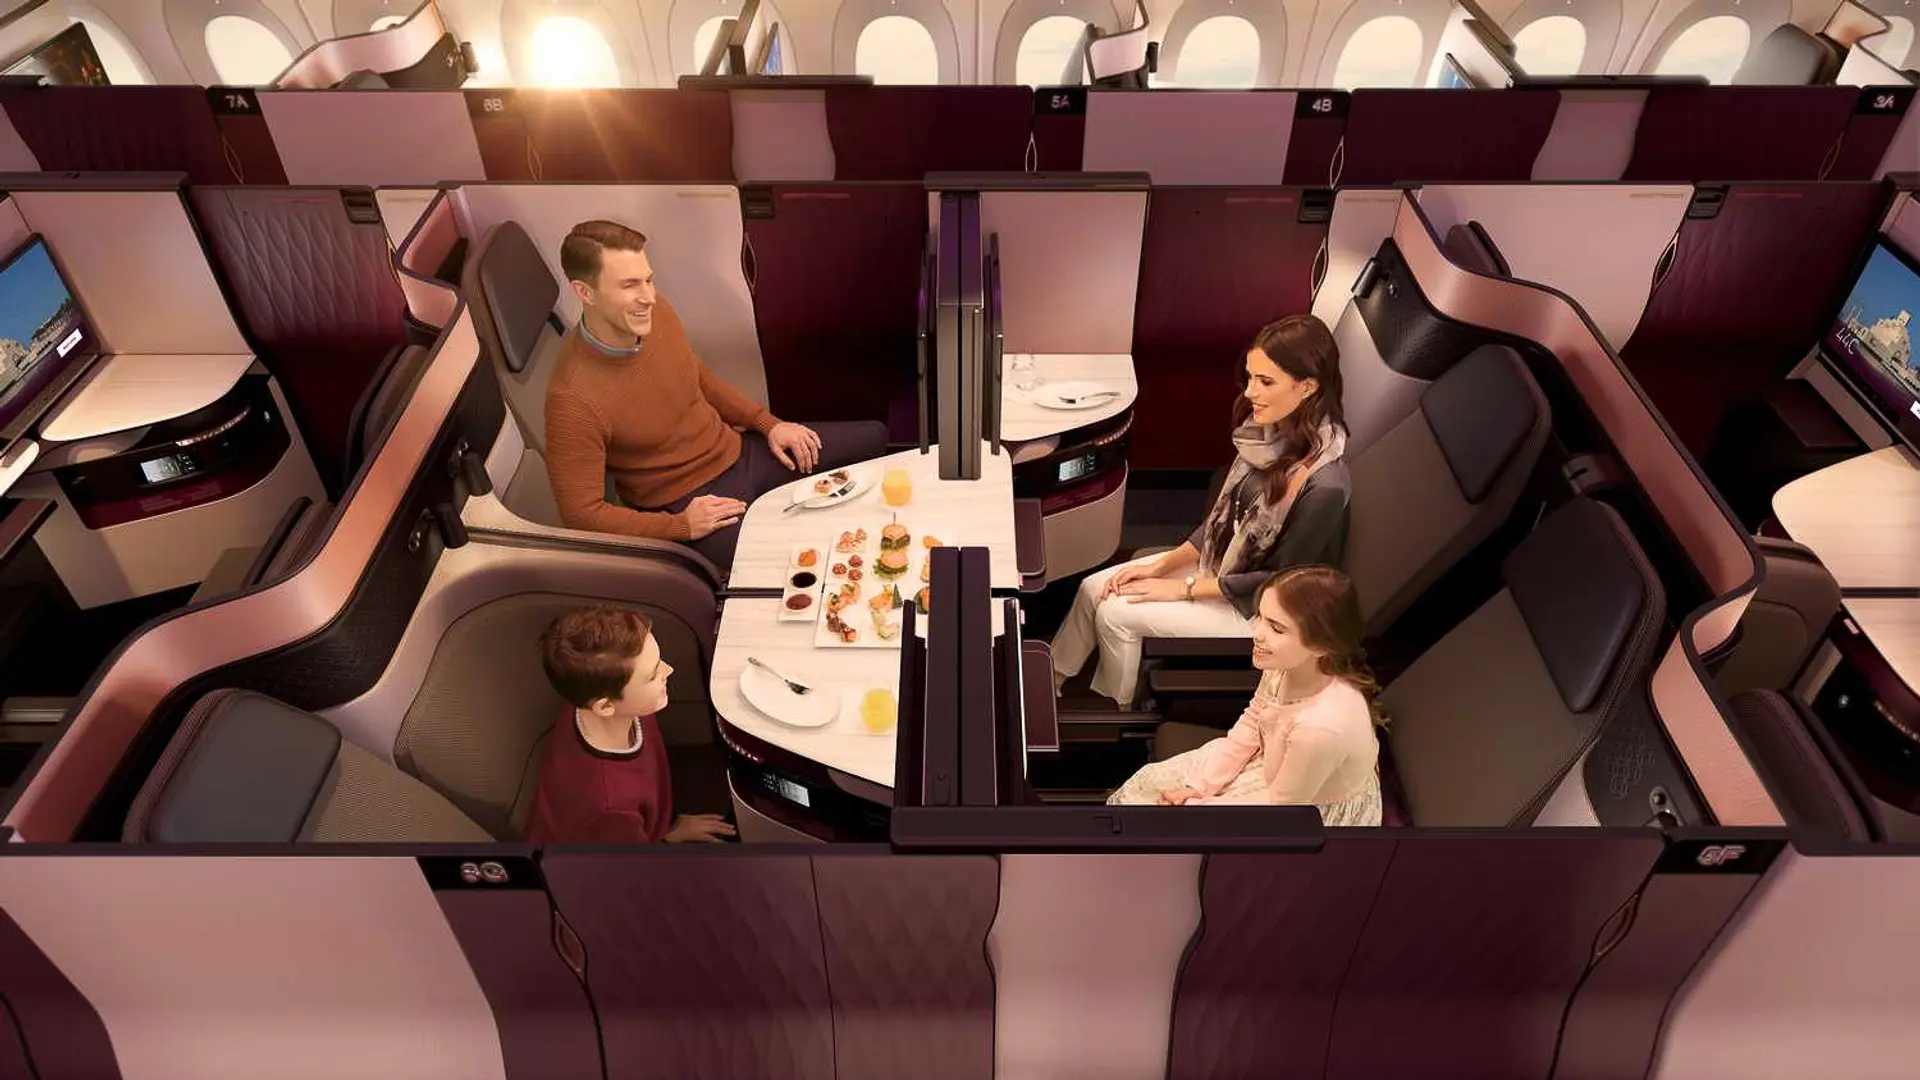 Airlines News - Qatar Airways awarded World's Best Airline and World's Best Business Class